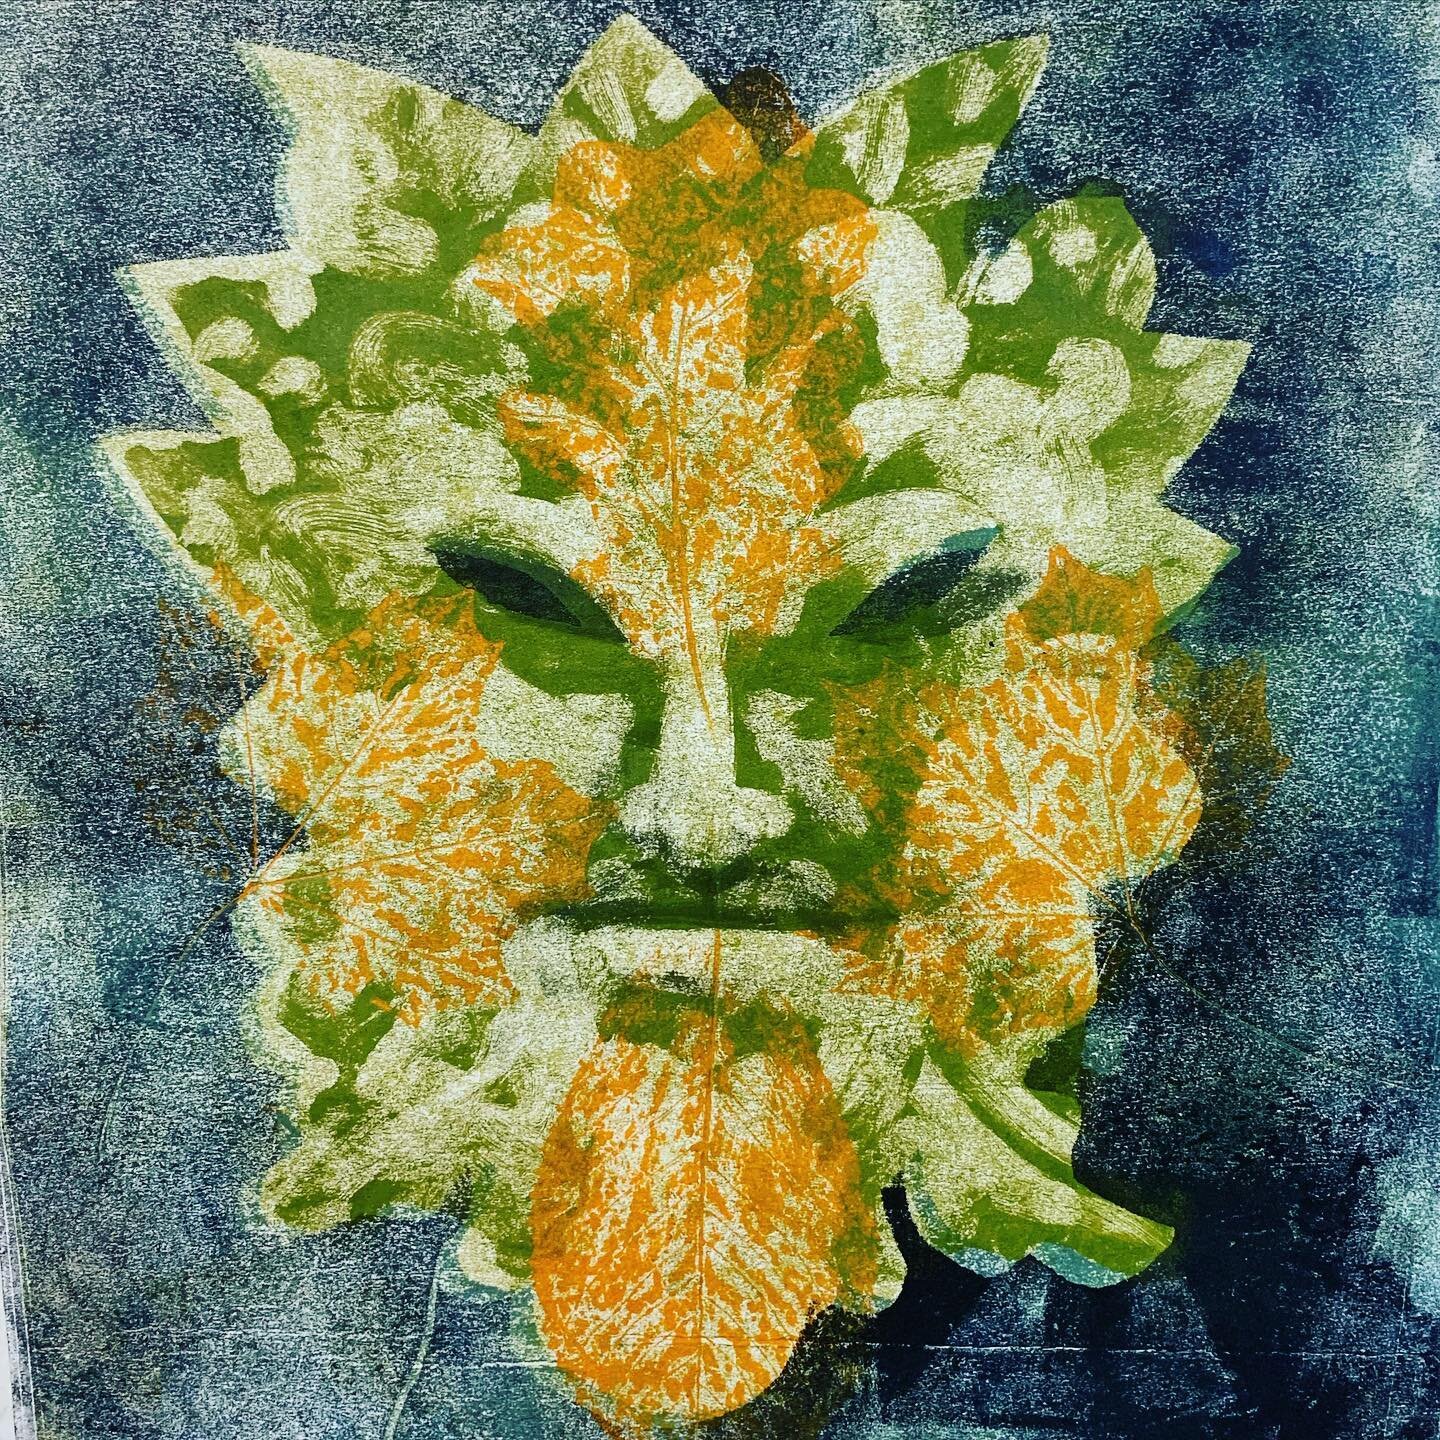 I don&rsquo;t know if I&rsquo;ll be able to complete this challenge as I currently have two jobs plus the kids but here&rsquo;s my Green Man made as demo for one of my classes but with #folktober in mind, and as it is a #monoprint it can also be an #